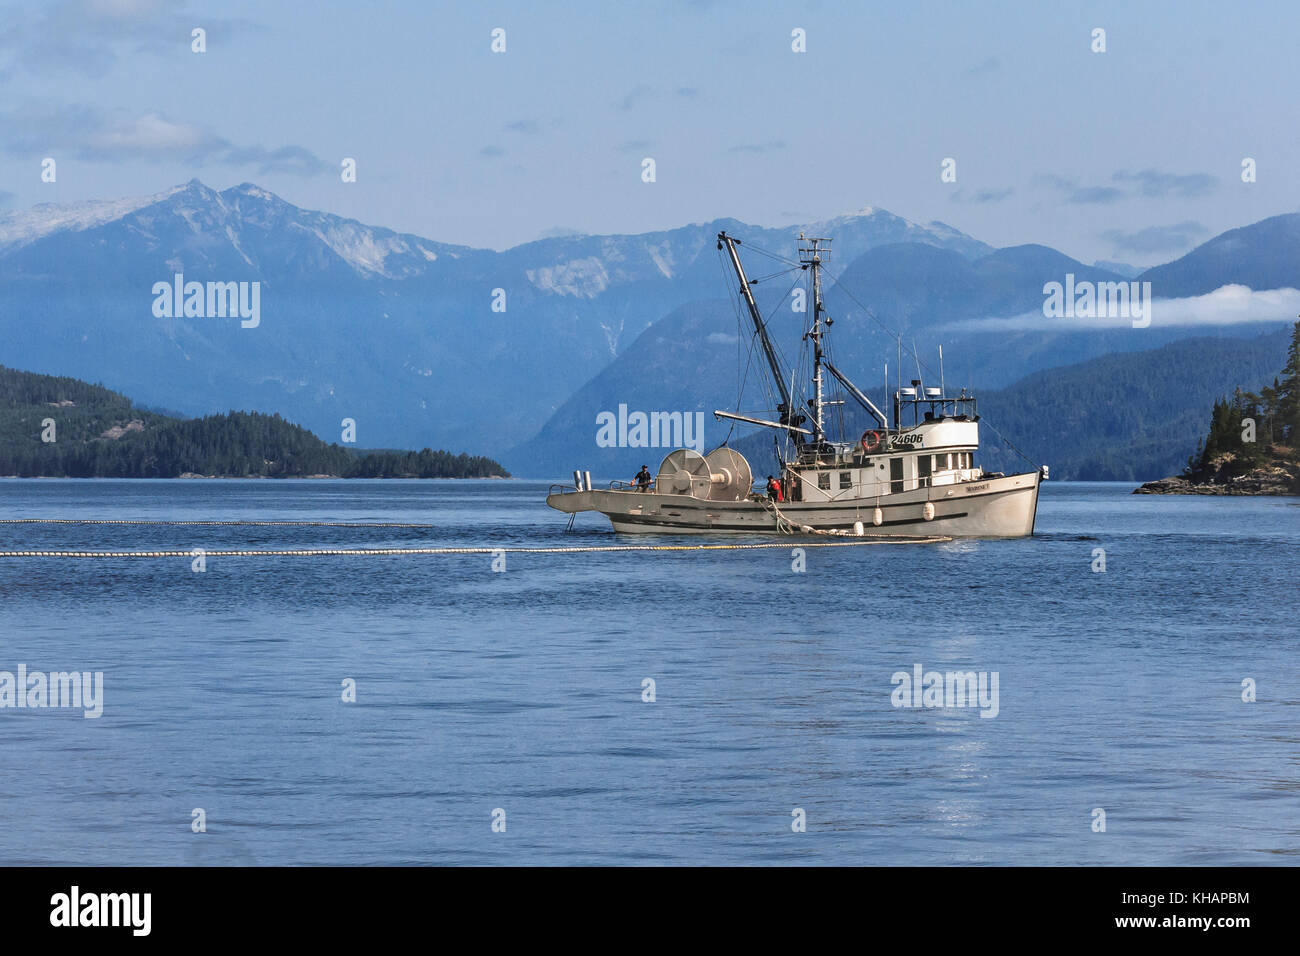 Fishermen on the Canadian vessel 'Marinet' tend a seine net during a commercial salmon fishery in Johnstone Strait, BC (Coast Range in background). Stock Photo